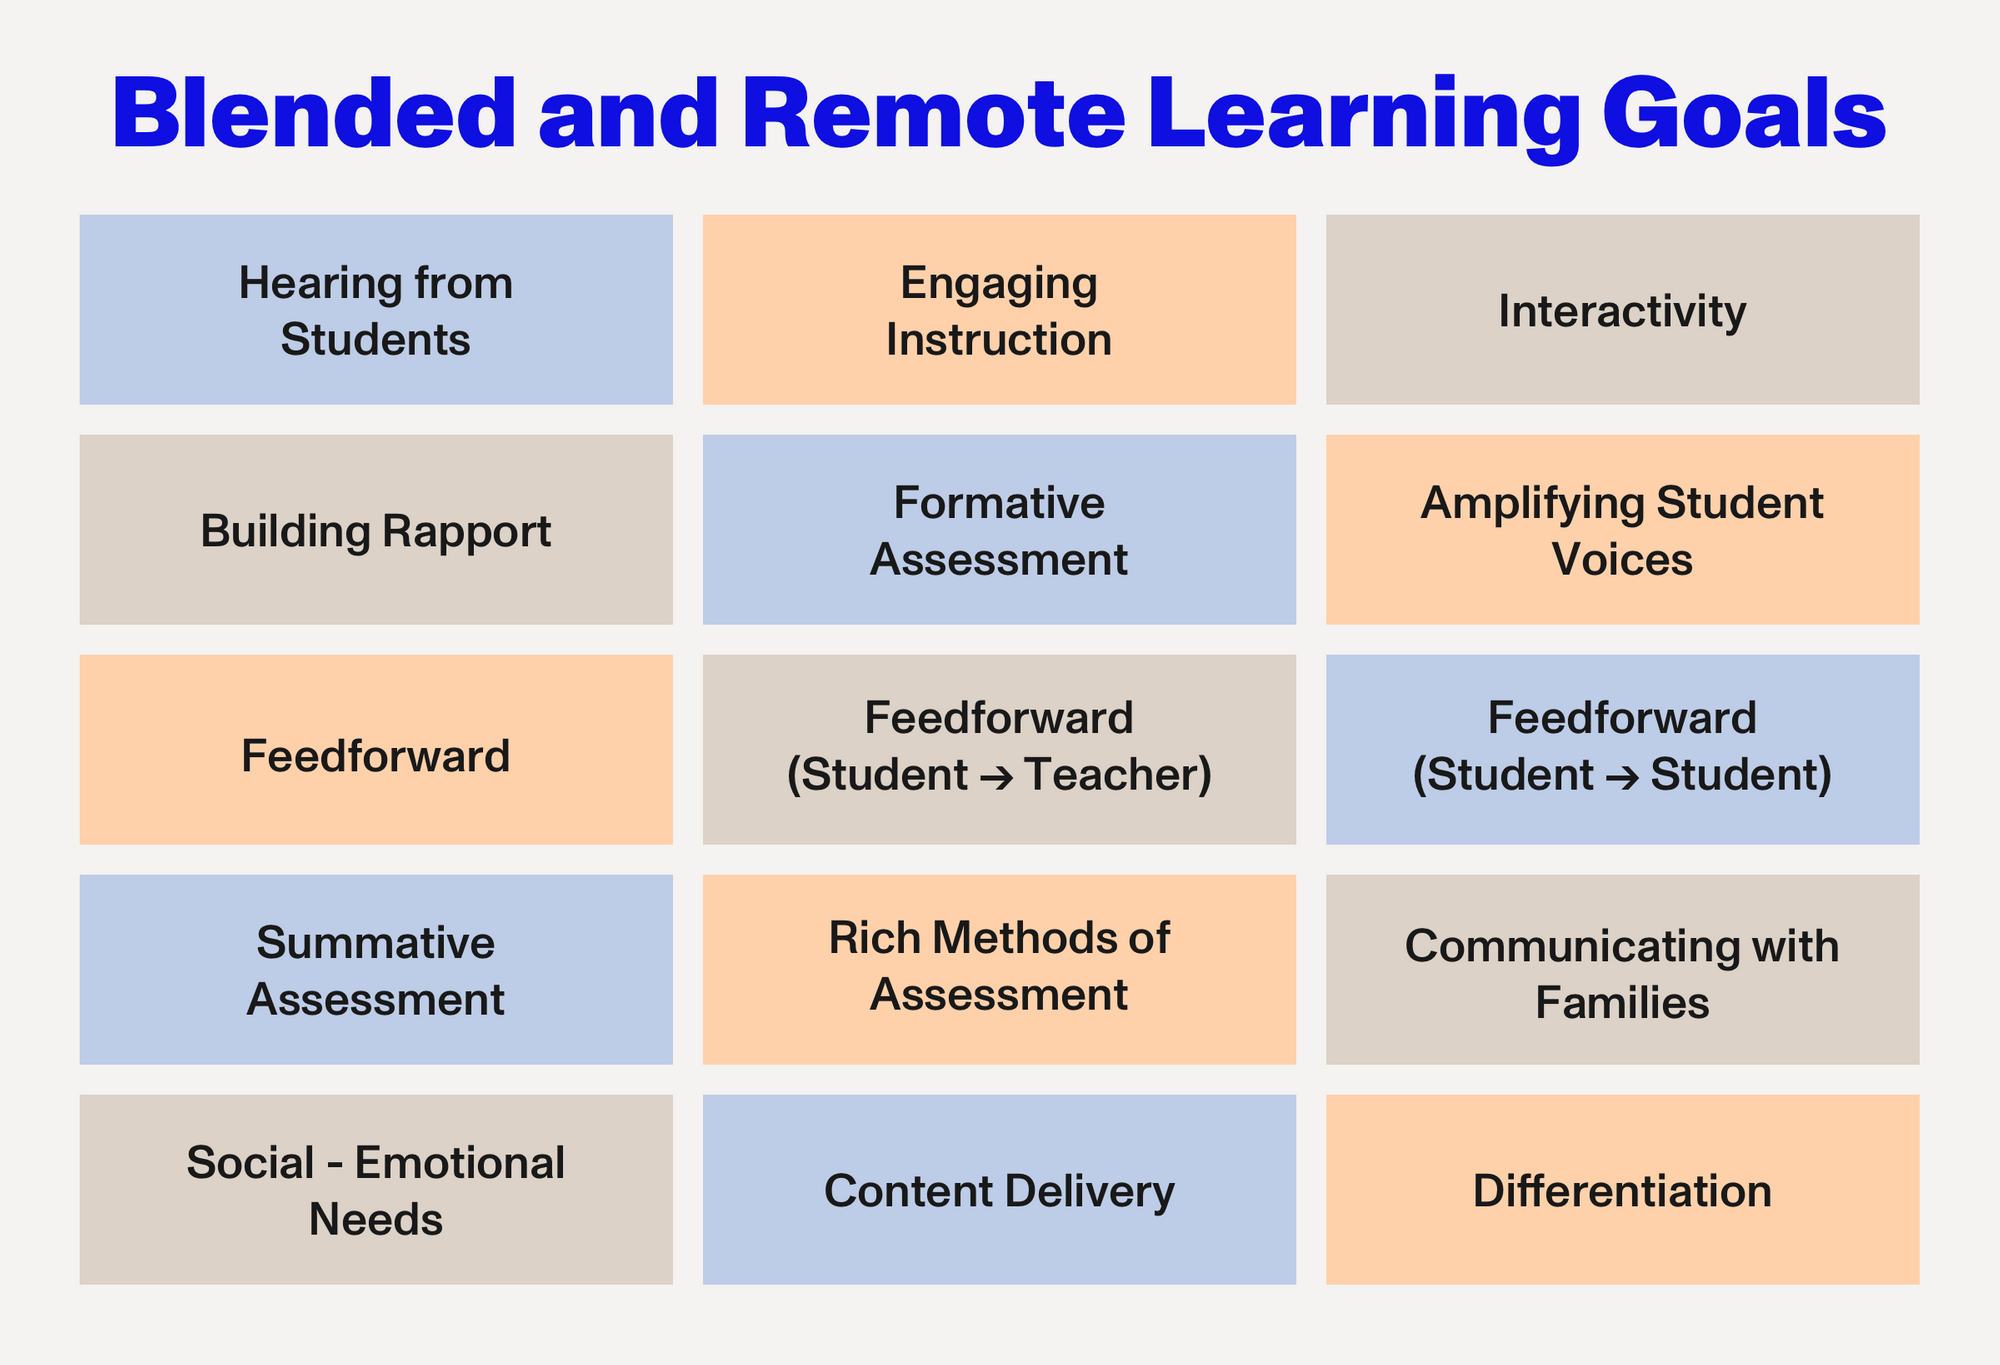 BLENDED-AND-REMOTE-LEARNING-GOALS